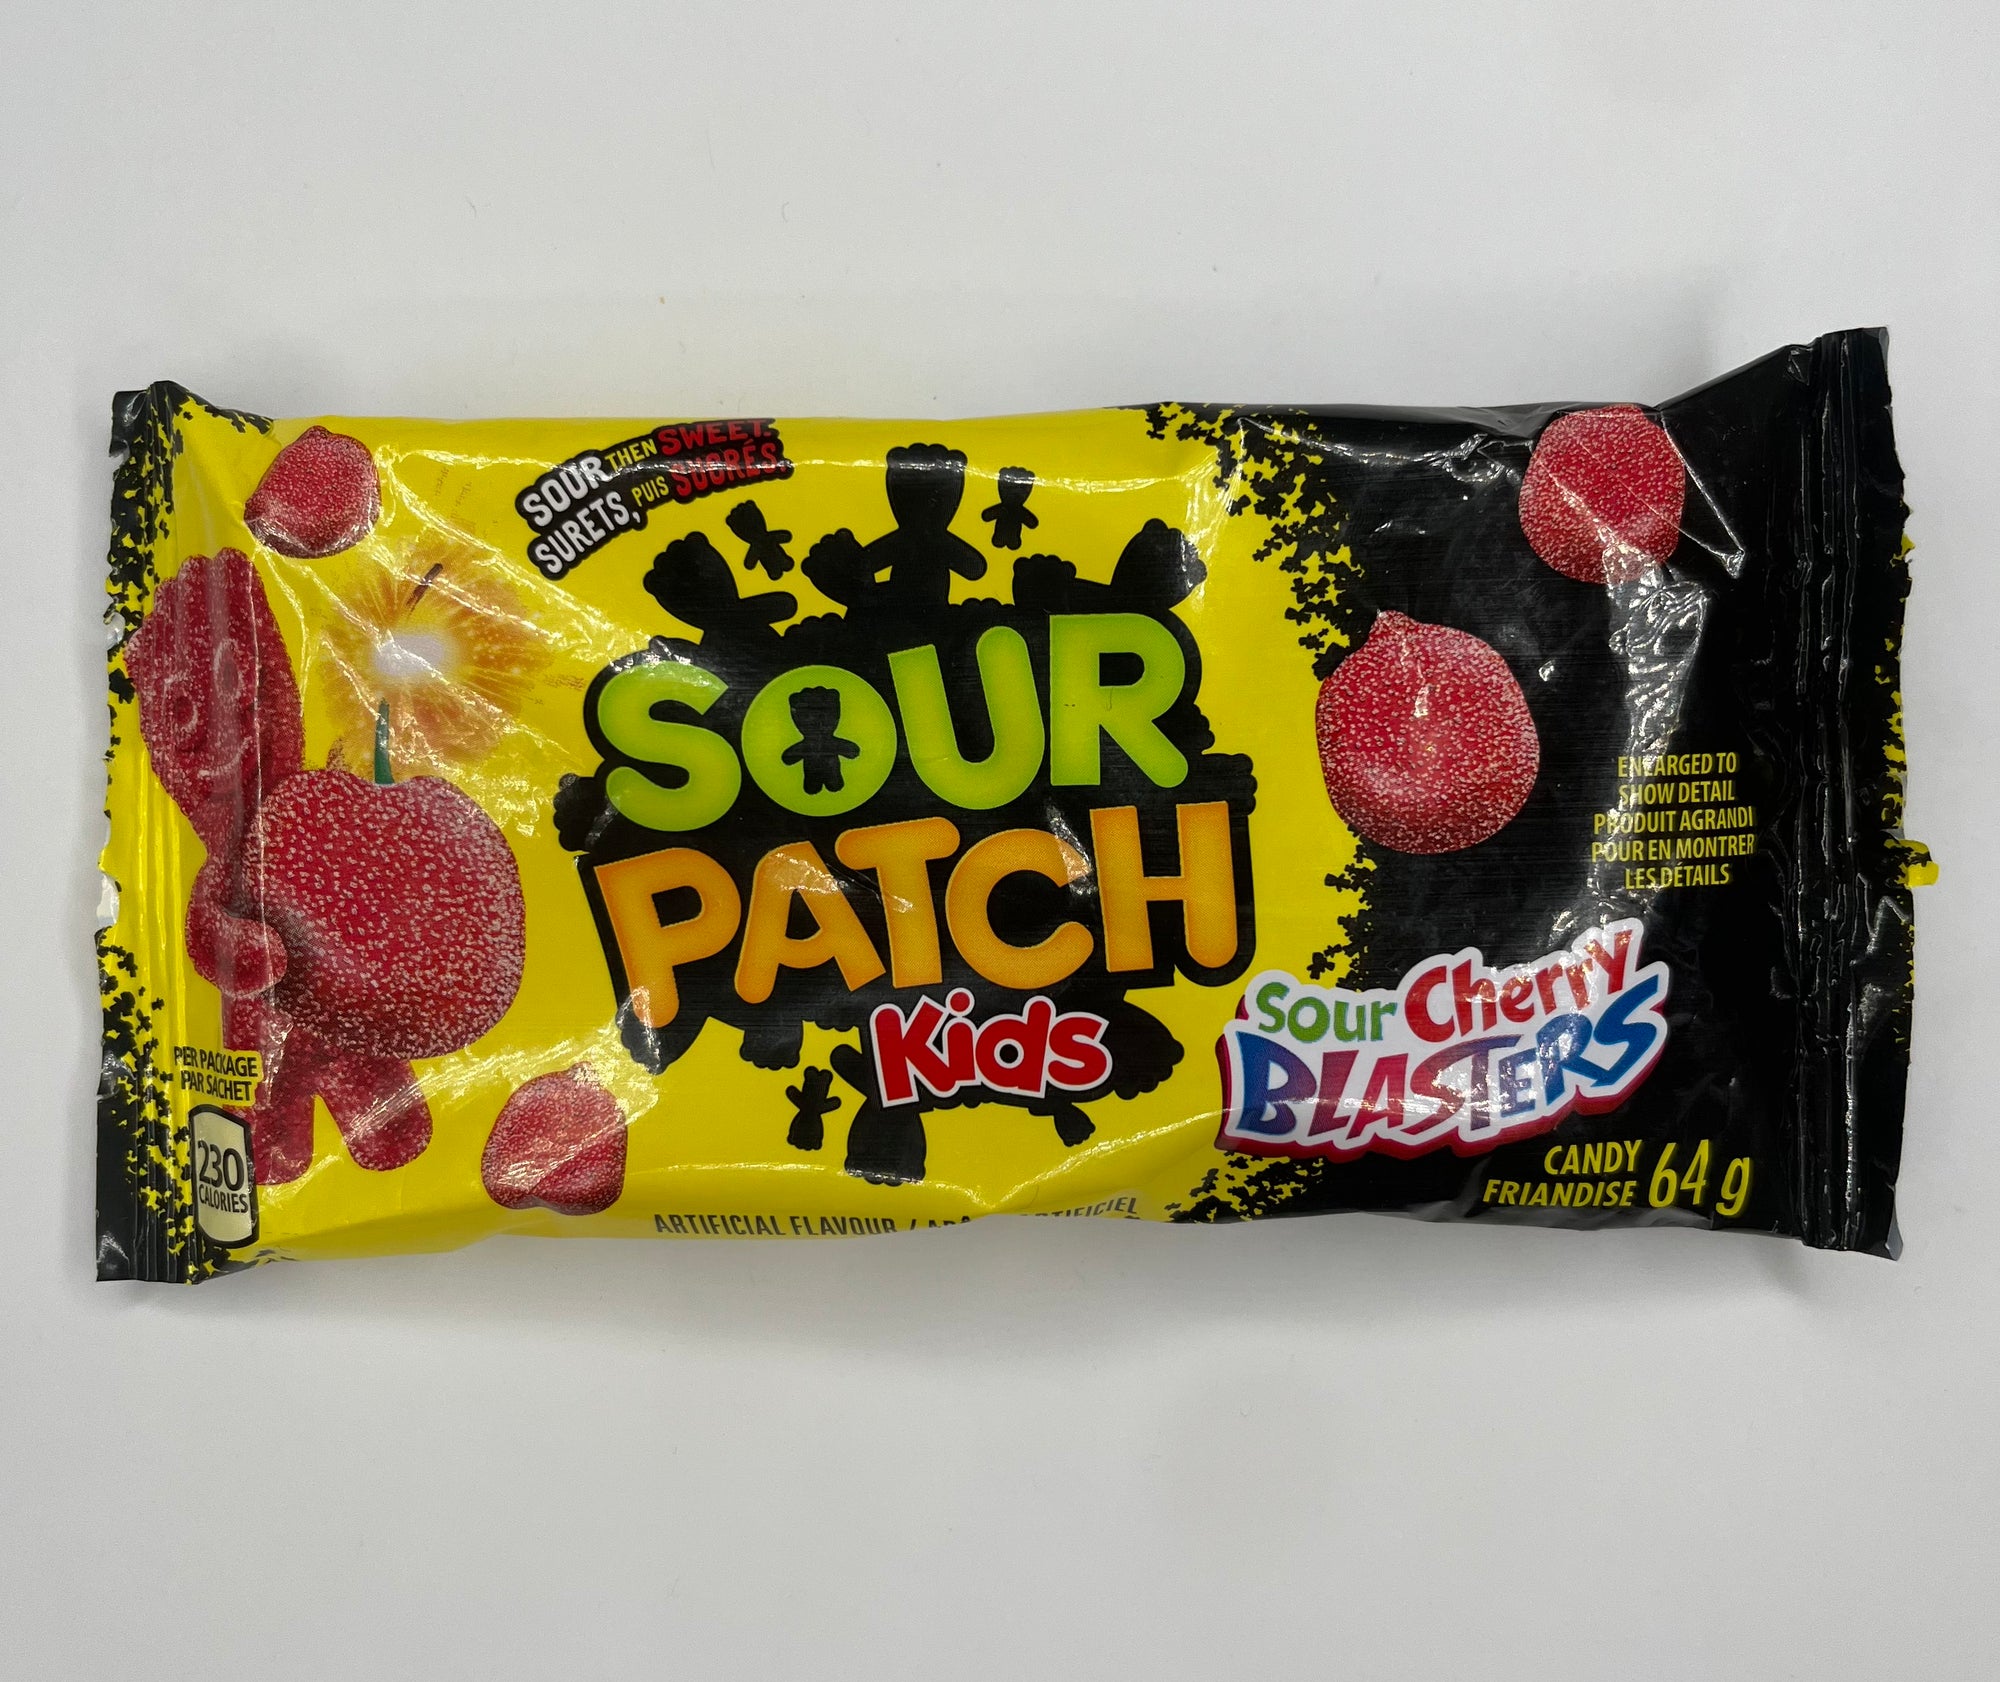 Sour Patch Kids Cherry Blasters small bag (Canada)